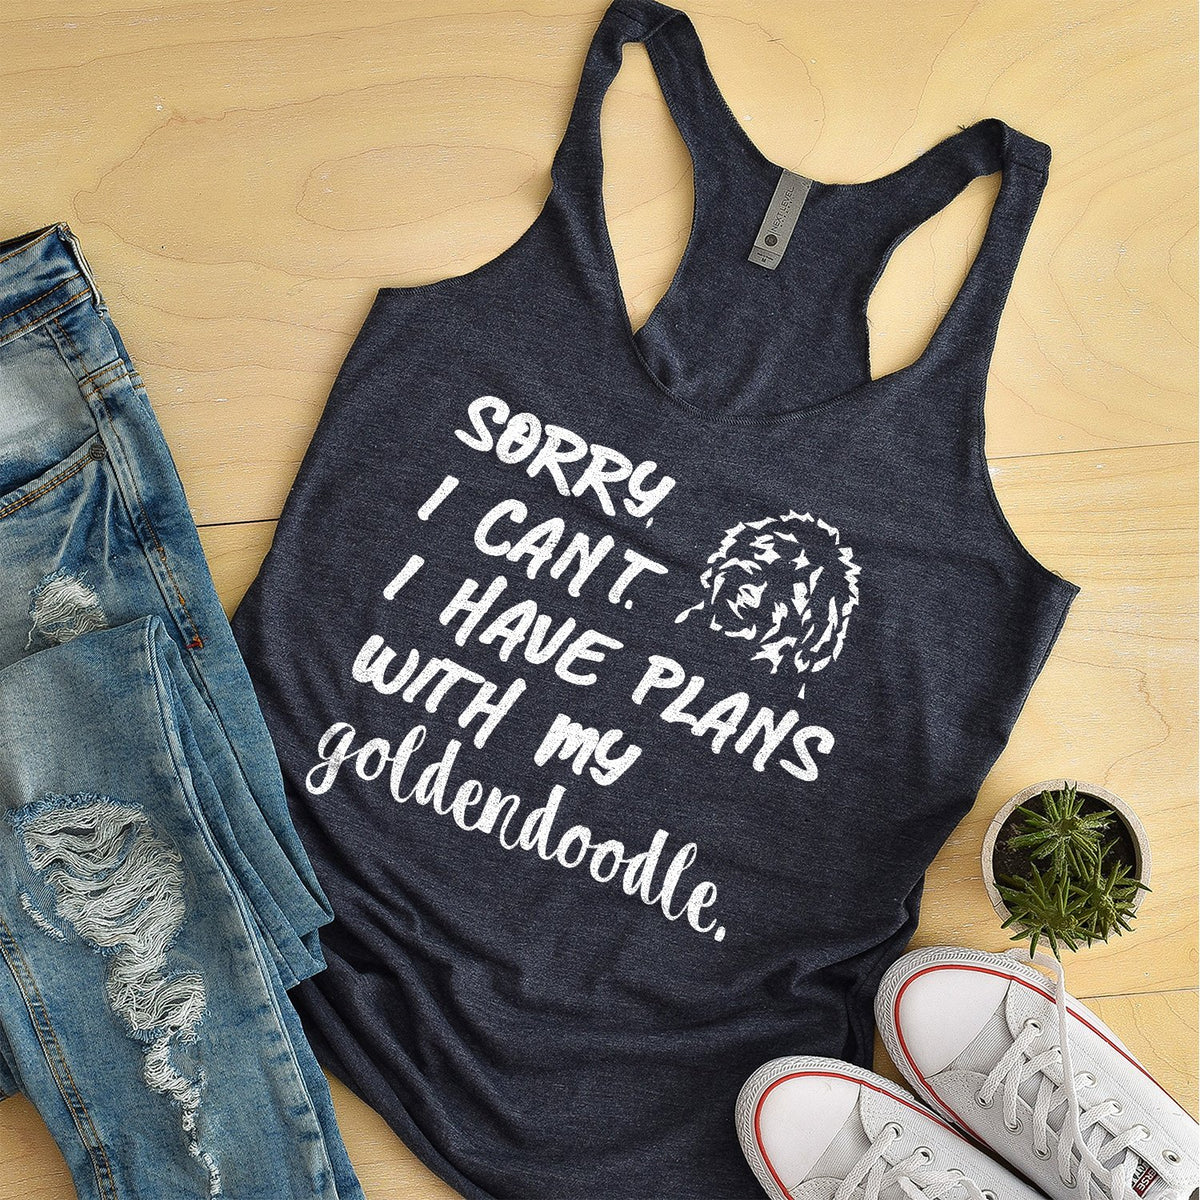 Sorry I Can&#39;t I Have Plans with My Goldendoodle - Tank Top Racerback